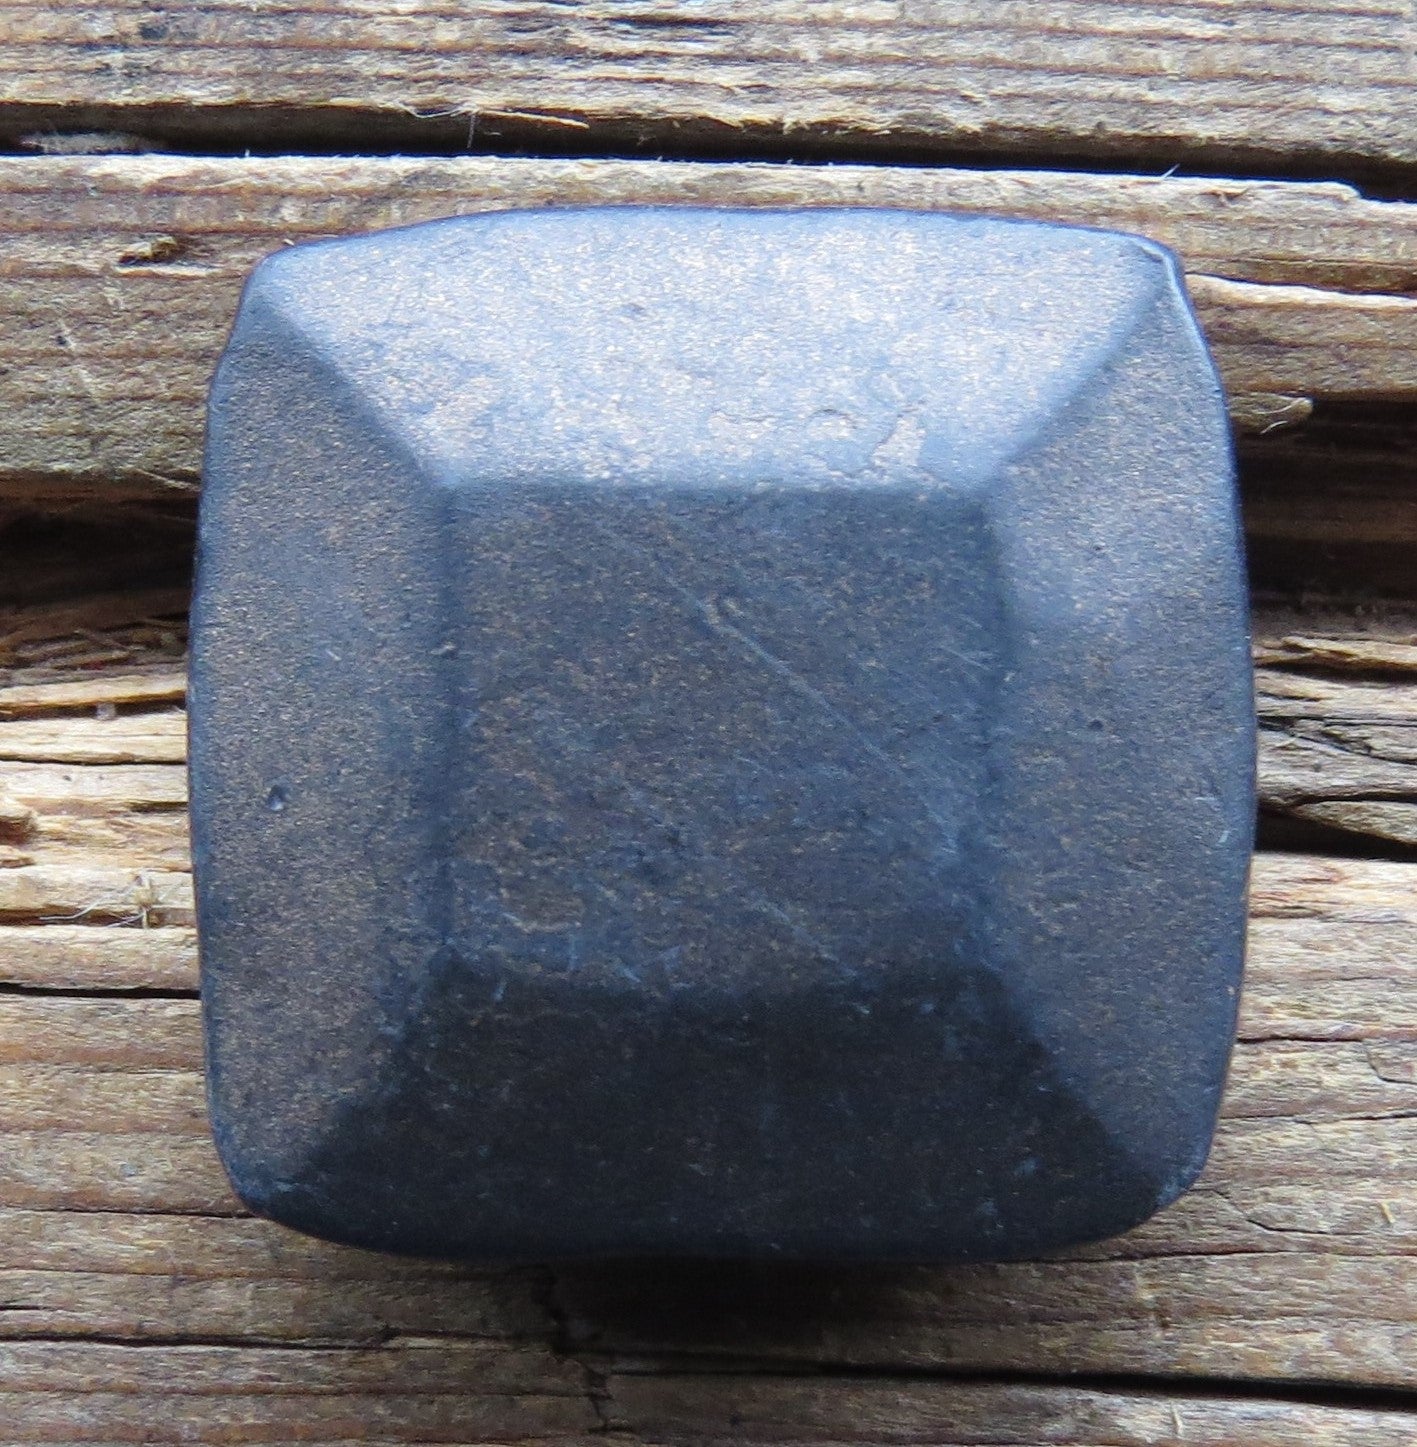 1 1/4" Square Plateau Hammered Head Nail